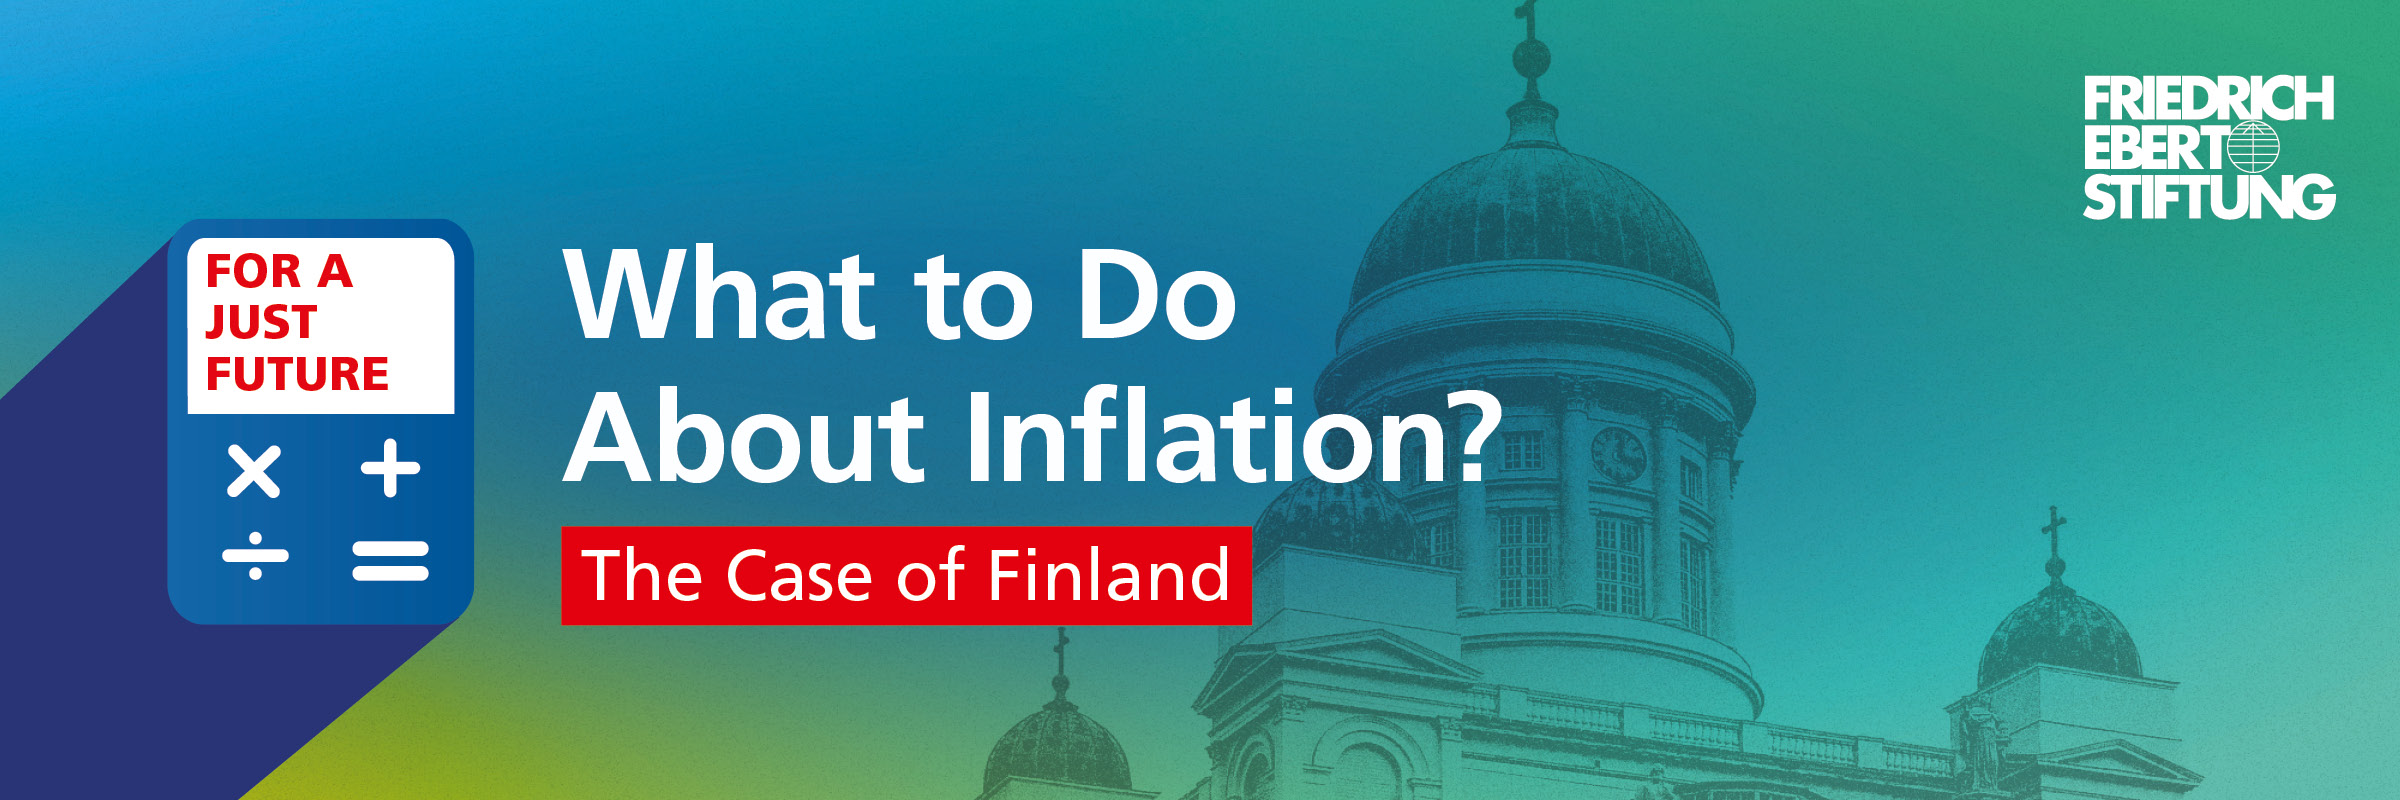 What to do About Inflation? Finland FES